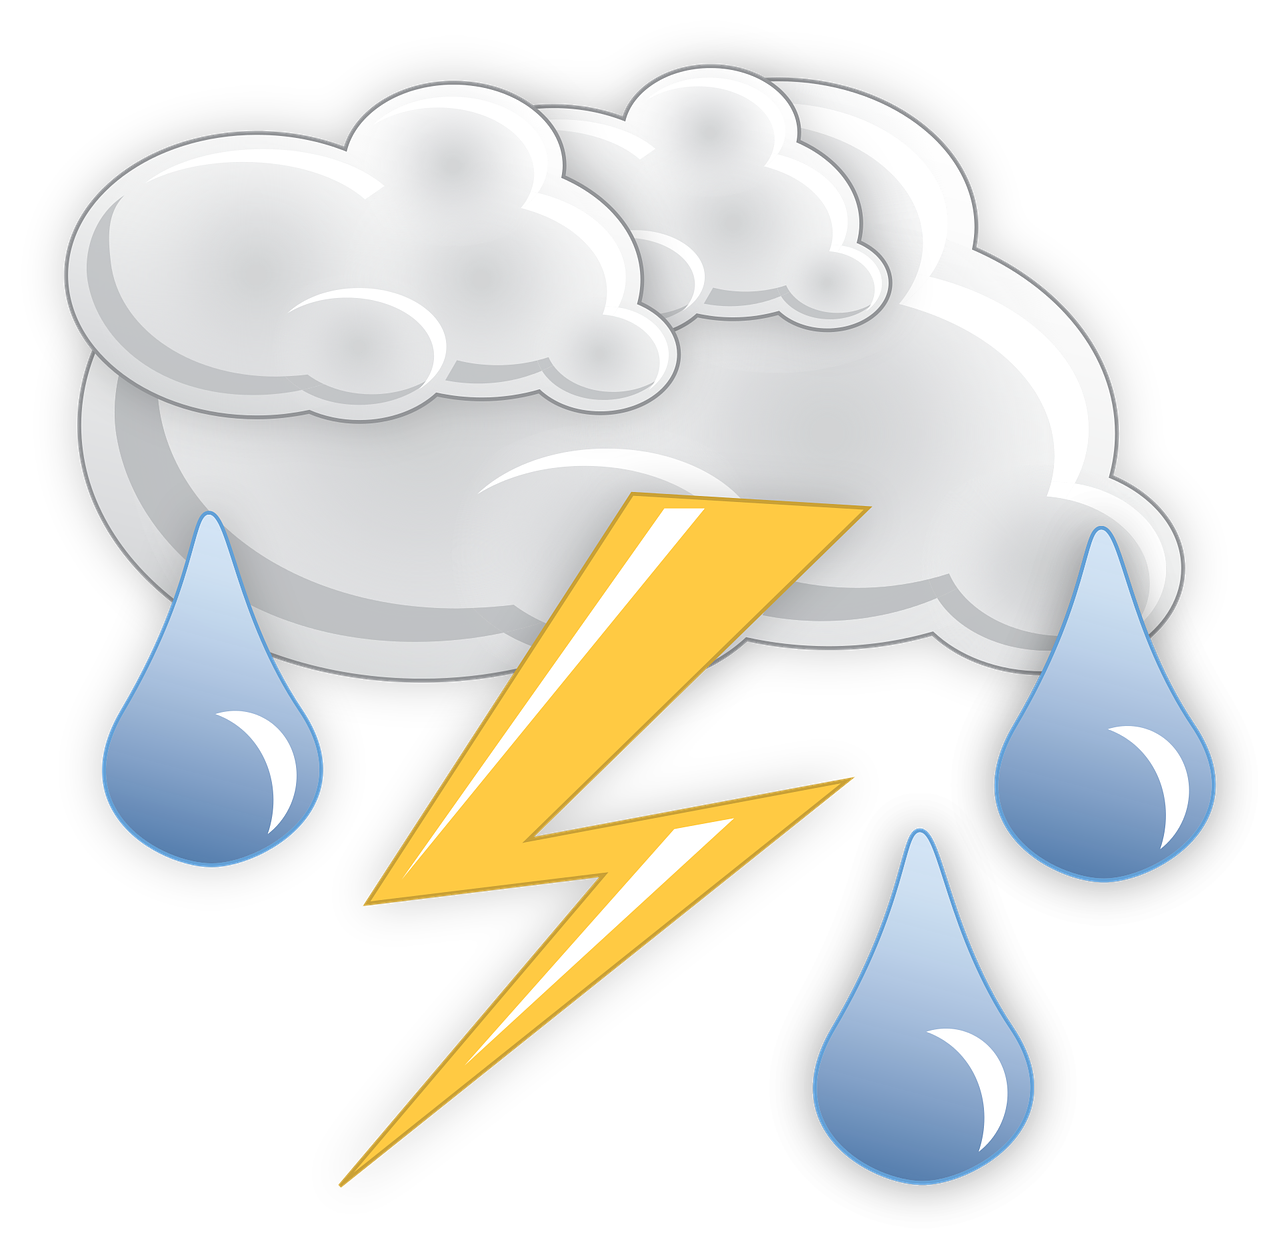 a cloud with a lightning and rain drops, a digital rendering, simple shading, on black background, from wheaton illinois, cartoon illustration